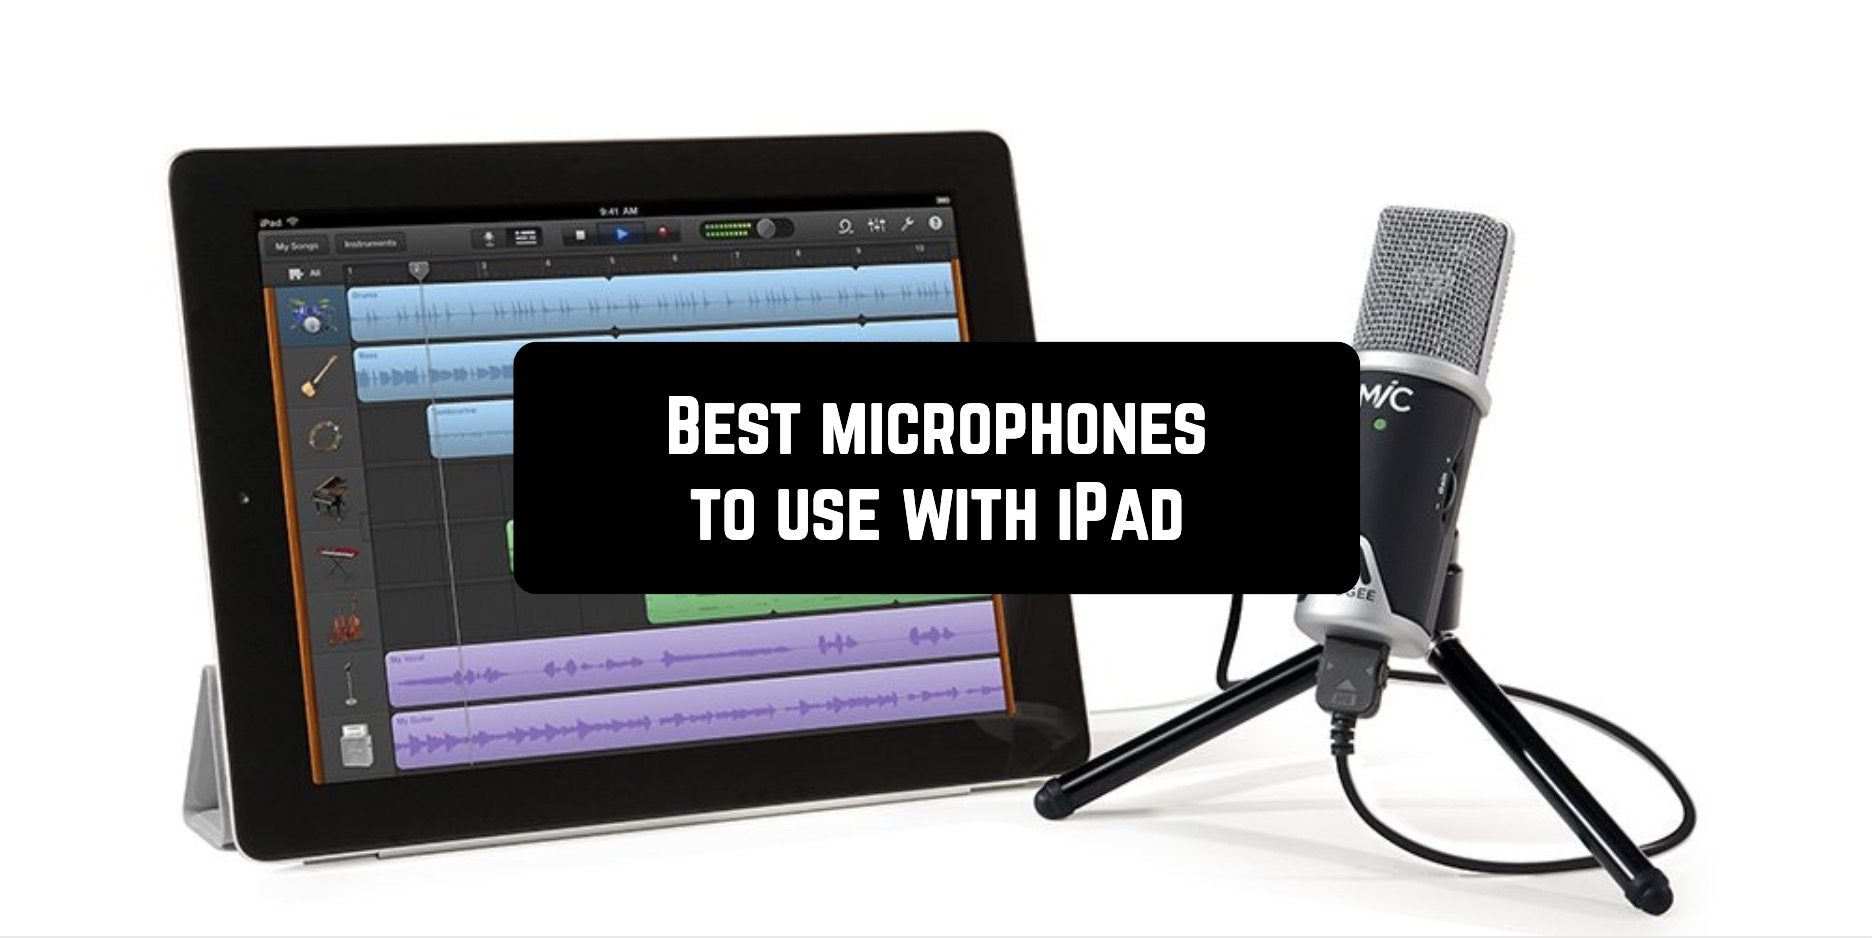 Best microphones to use with iPad